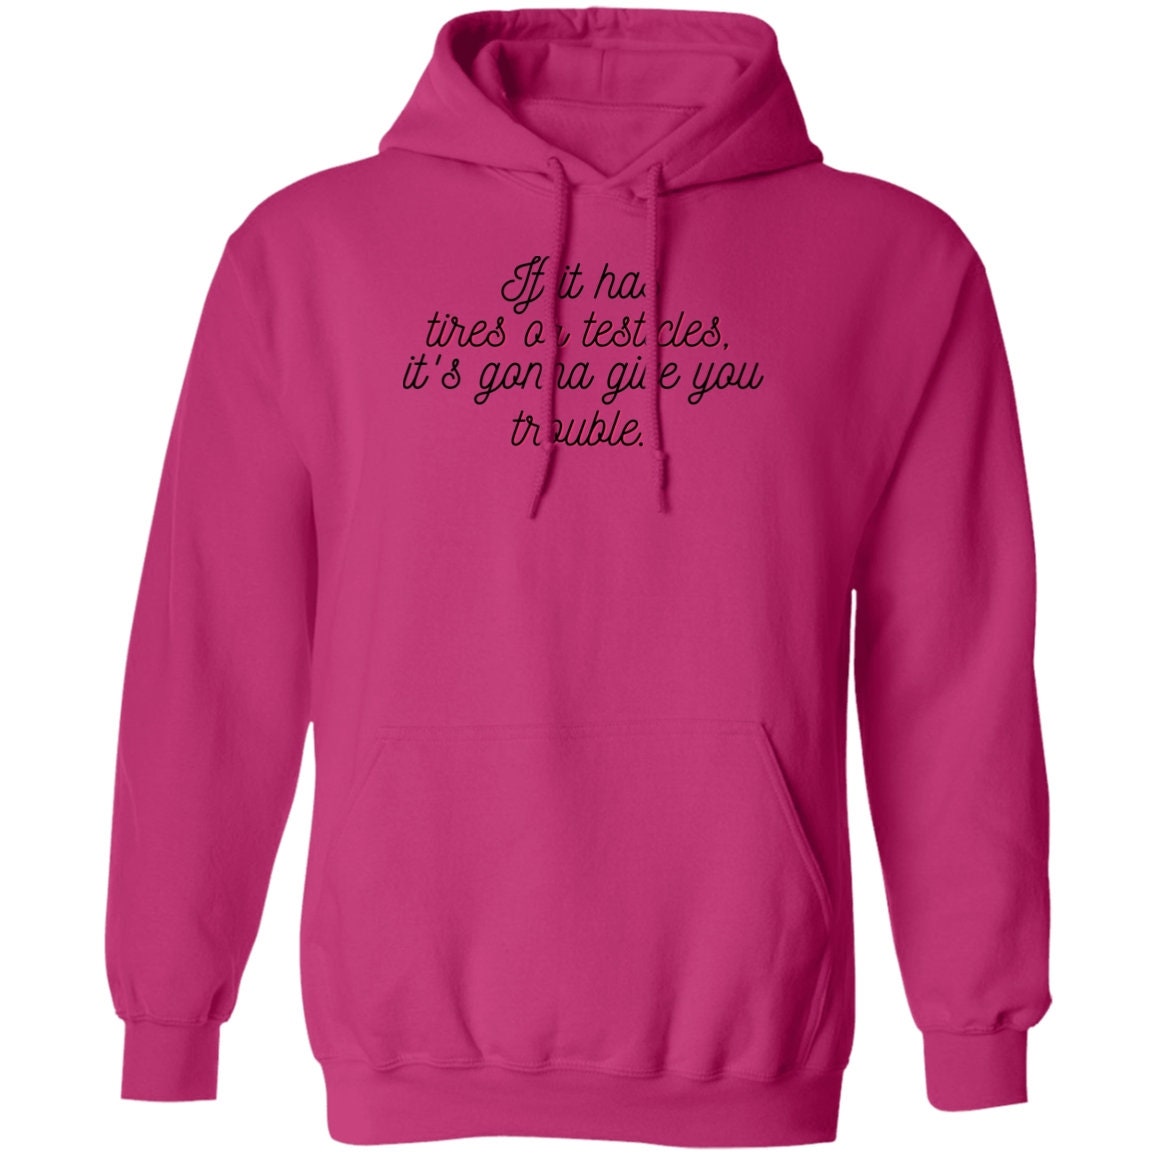 If it has tires or testicles, it's gonna be trouble. Hoodie